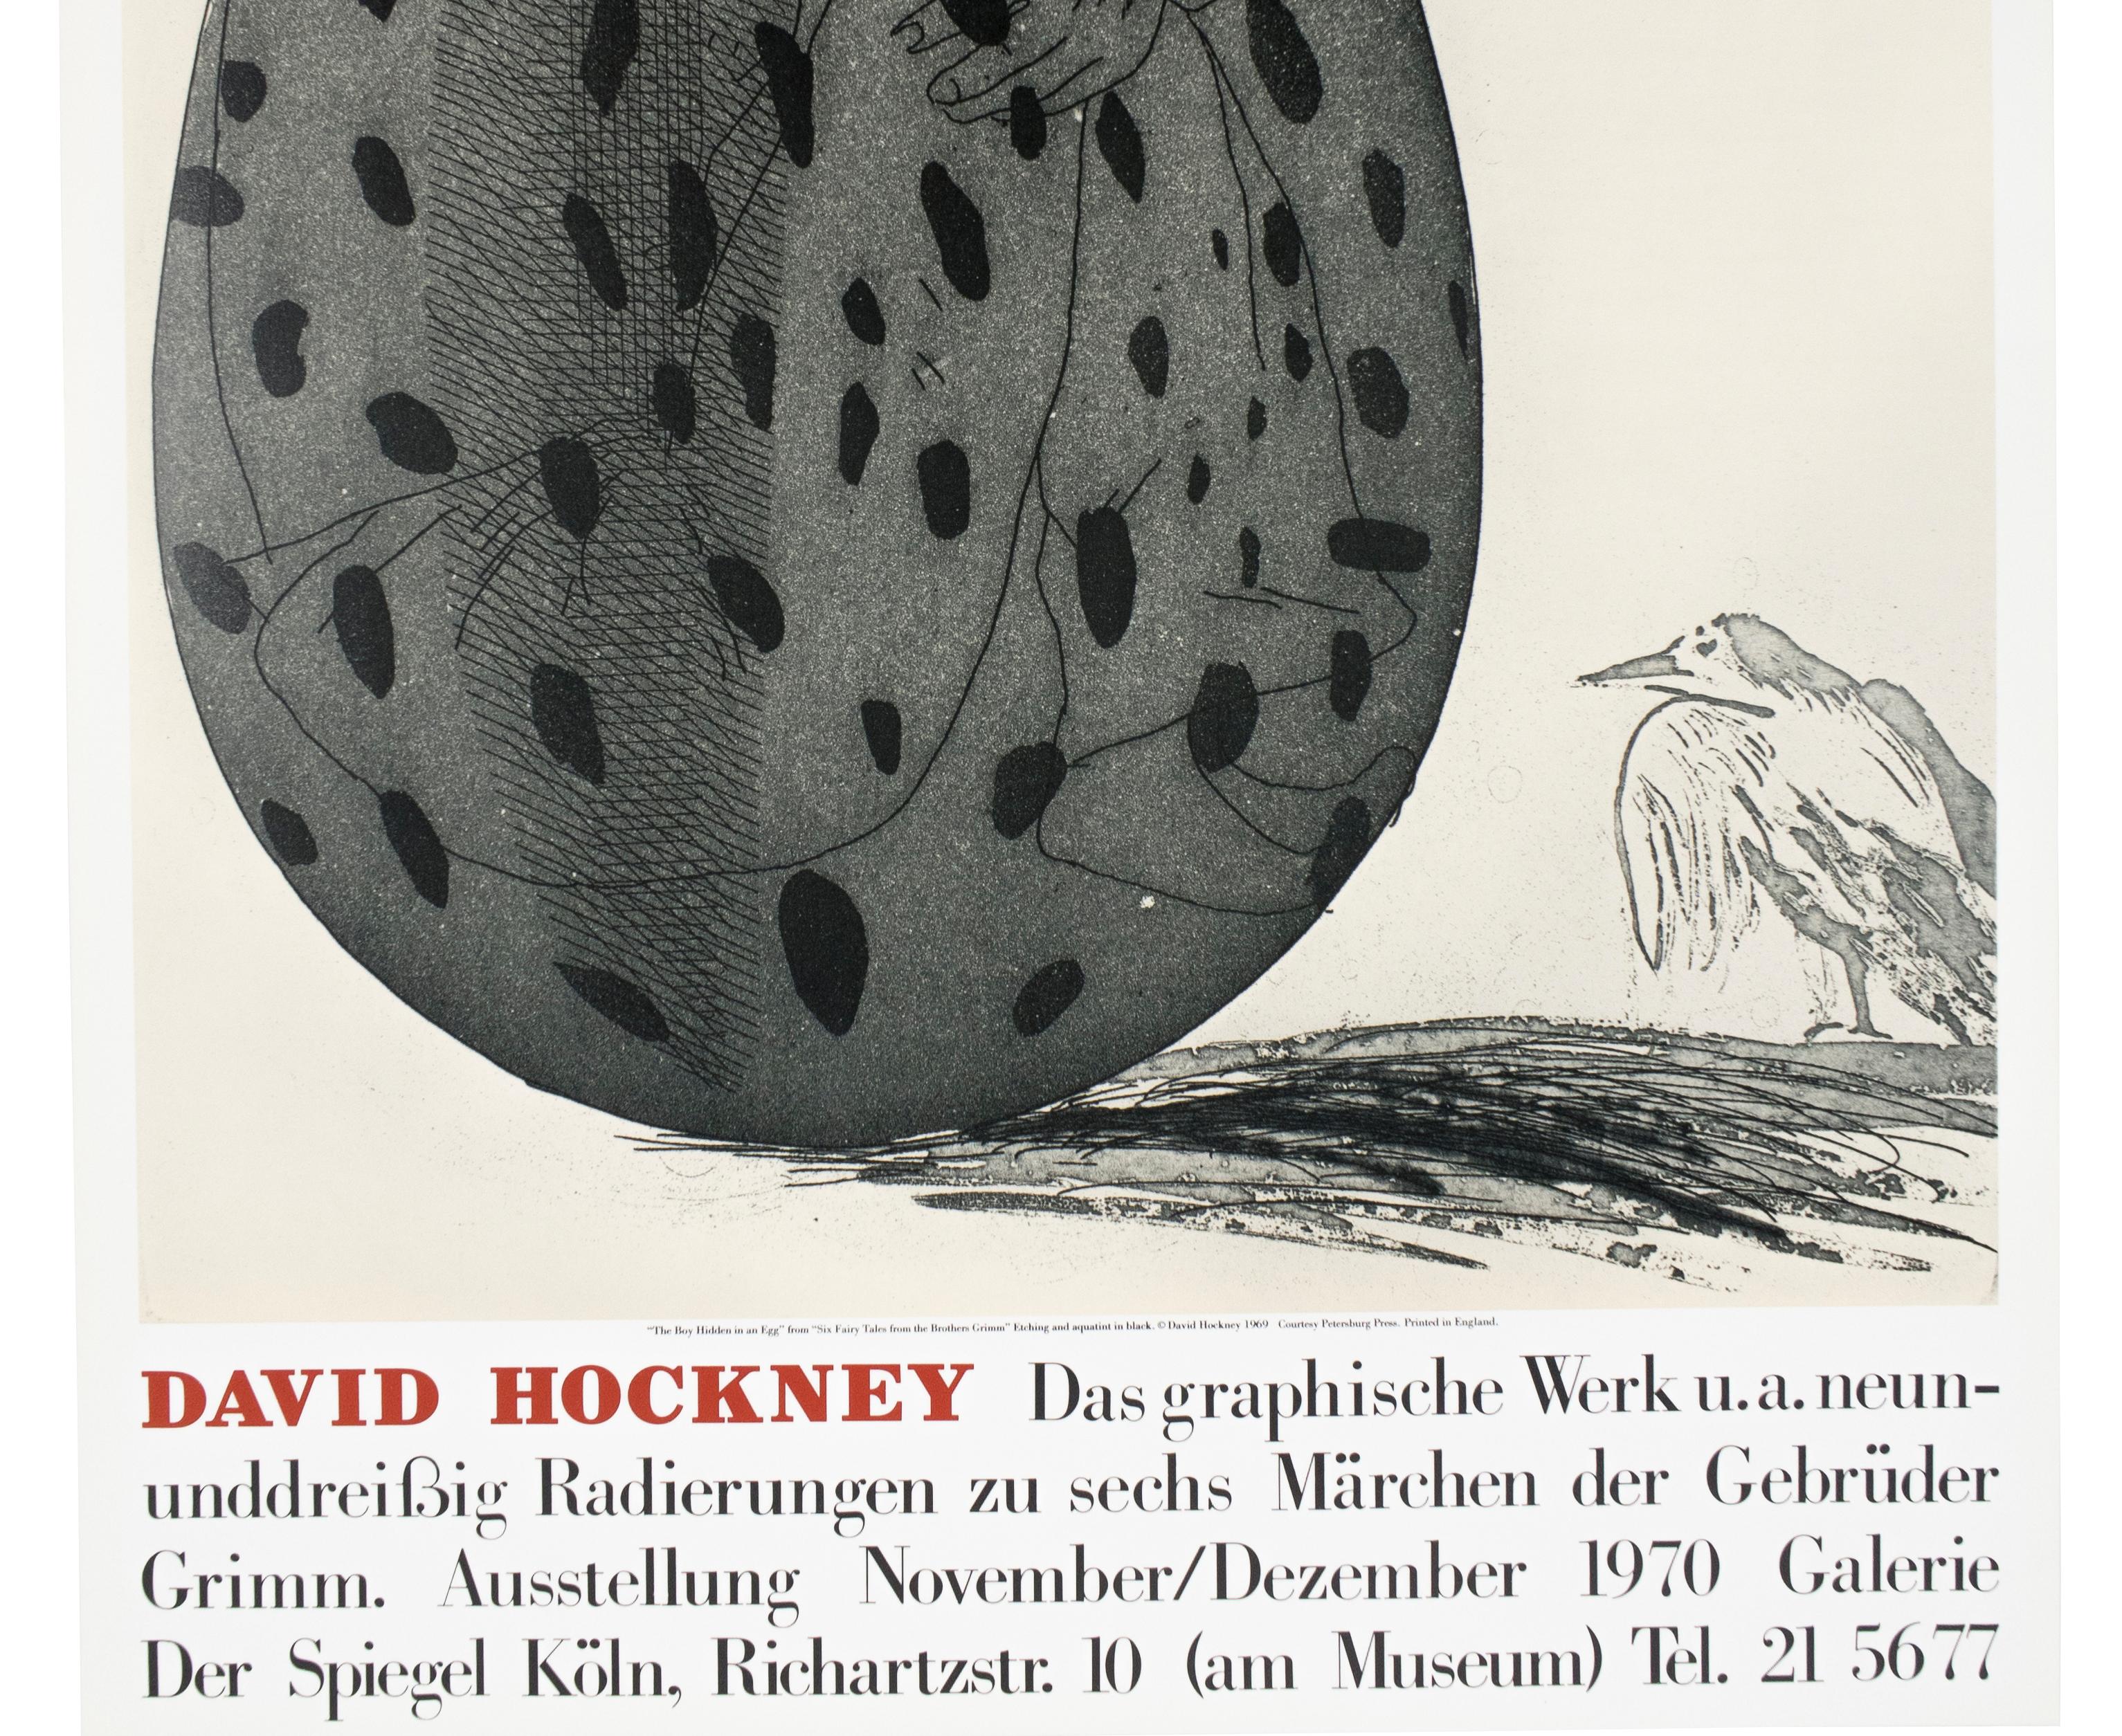 This vintage exhibition poster reproduces The Boy Hidden in an Egg by David Hockney from his Six Fairy Tales from the Brothers Grimm, 1969.  A shirtless young man curls up inside a dark grey speckled egg, as a small bird looks on. The poster was